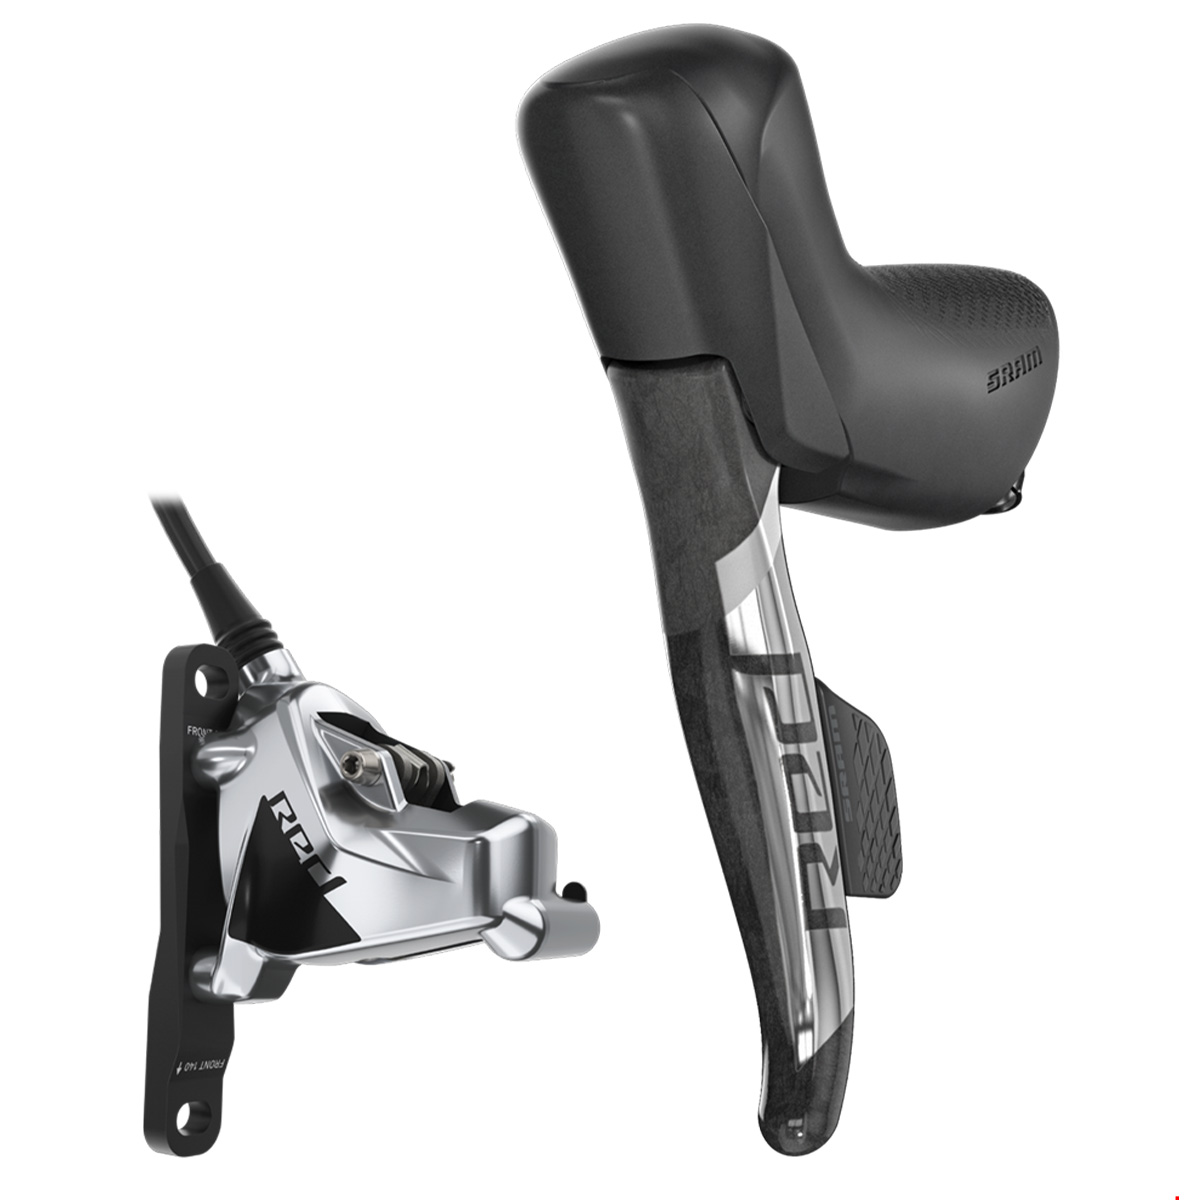 SRAM RED AXS D1 Front Shifter with Flat Mount Caliper